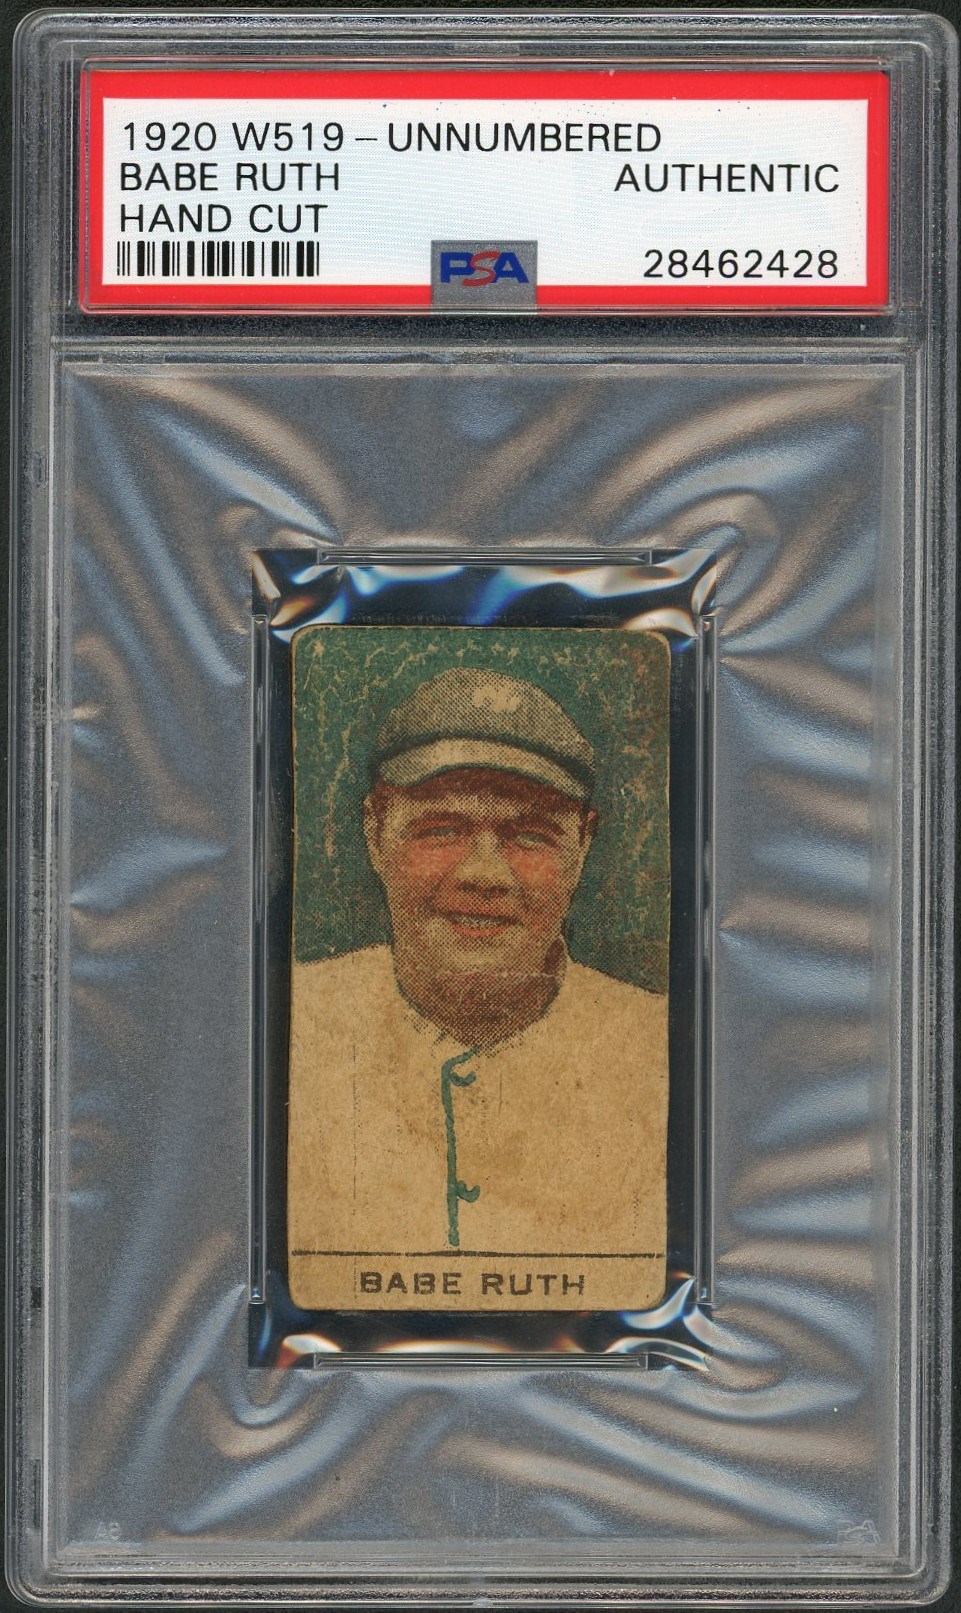 - 1920 W519 Unnumbered Babe Ruth (Hand Cut) - PSA AUTHENTIC